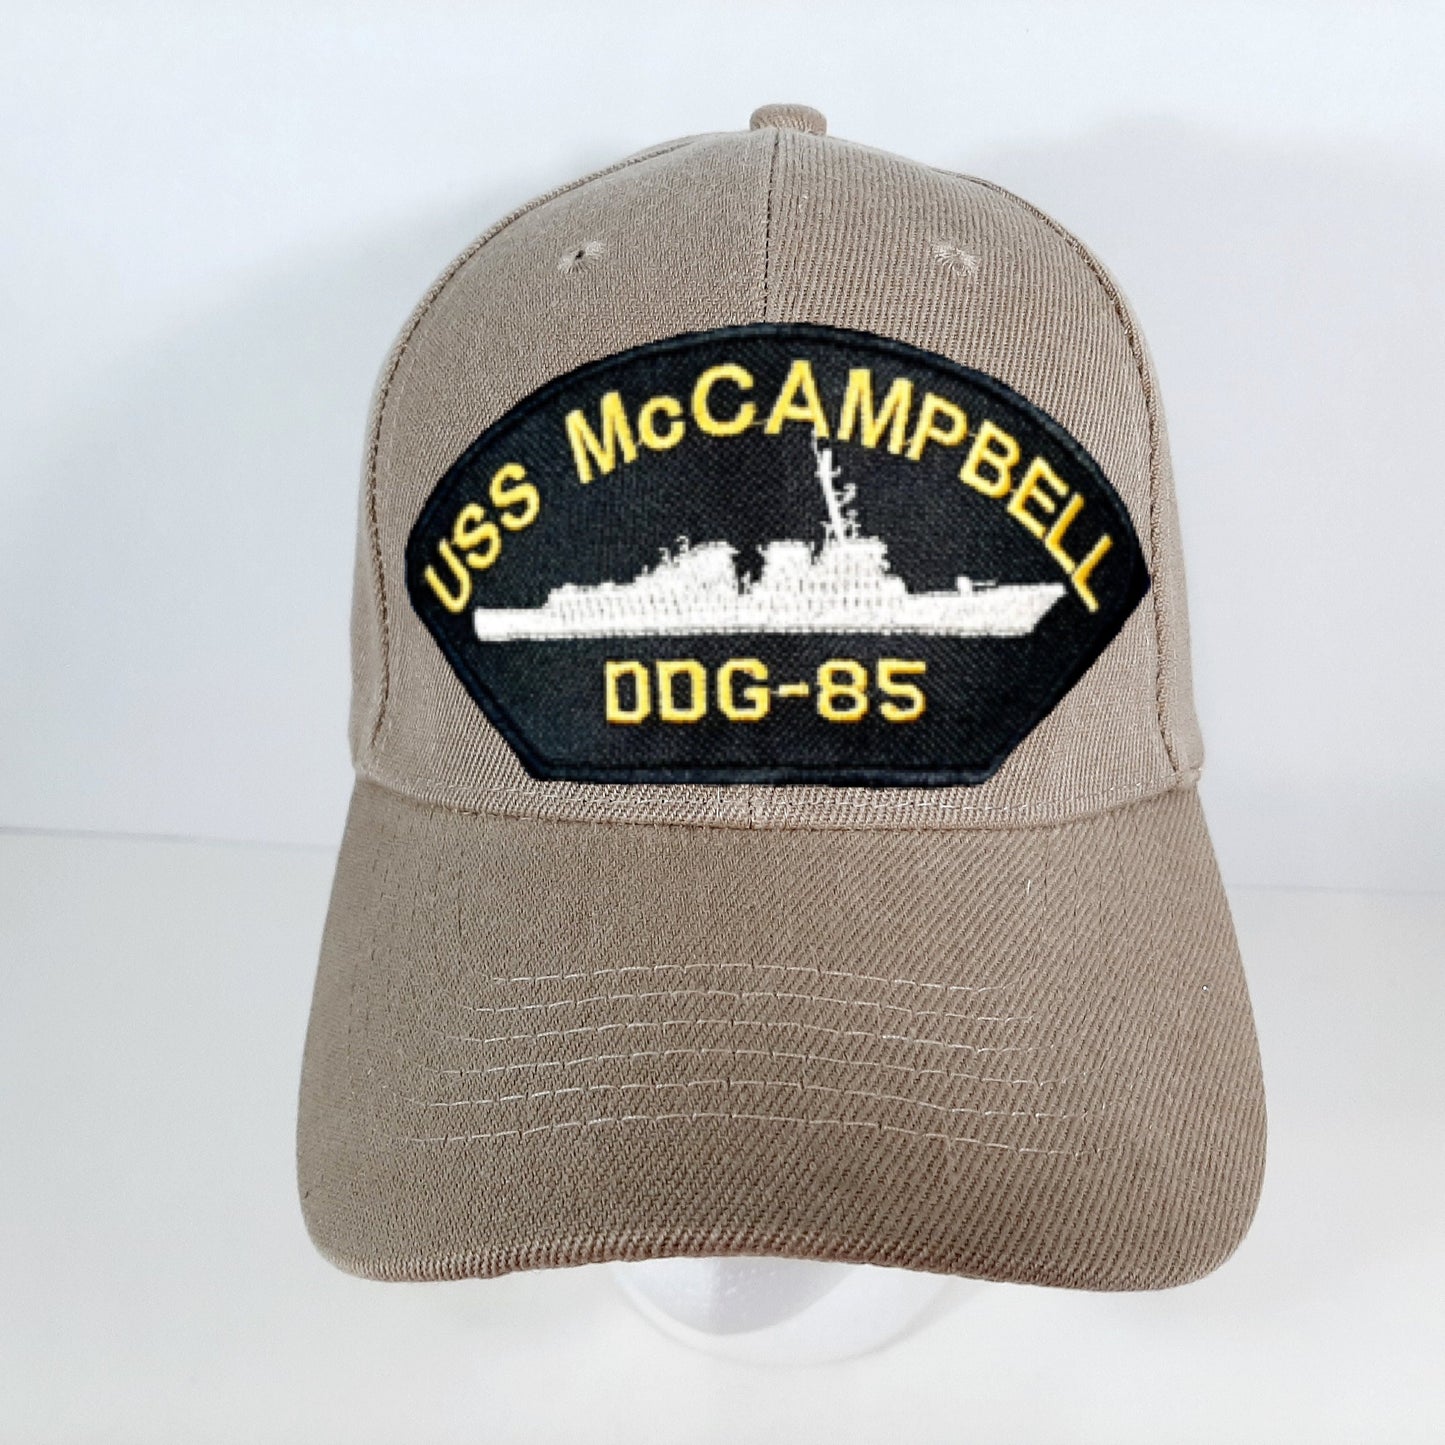 US Navy USS McCampbell DDG-85 Baseball Cap Embroidered Patch Hat Beige Tan